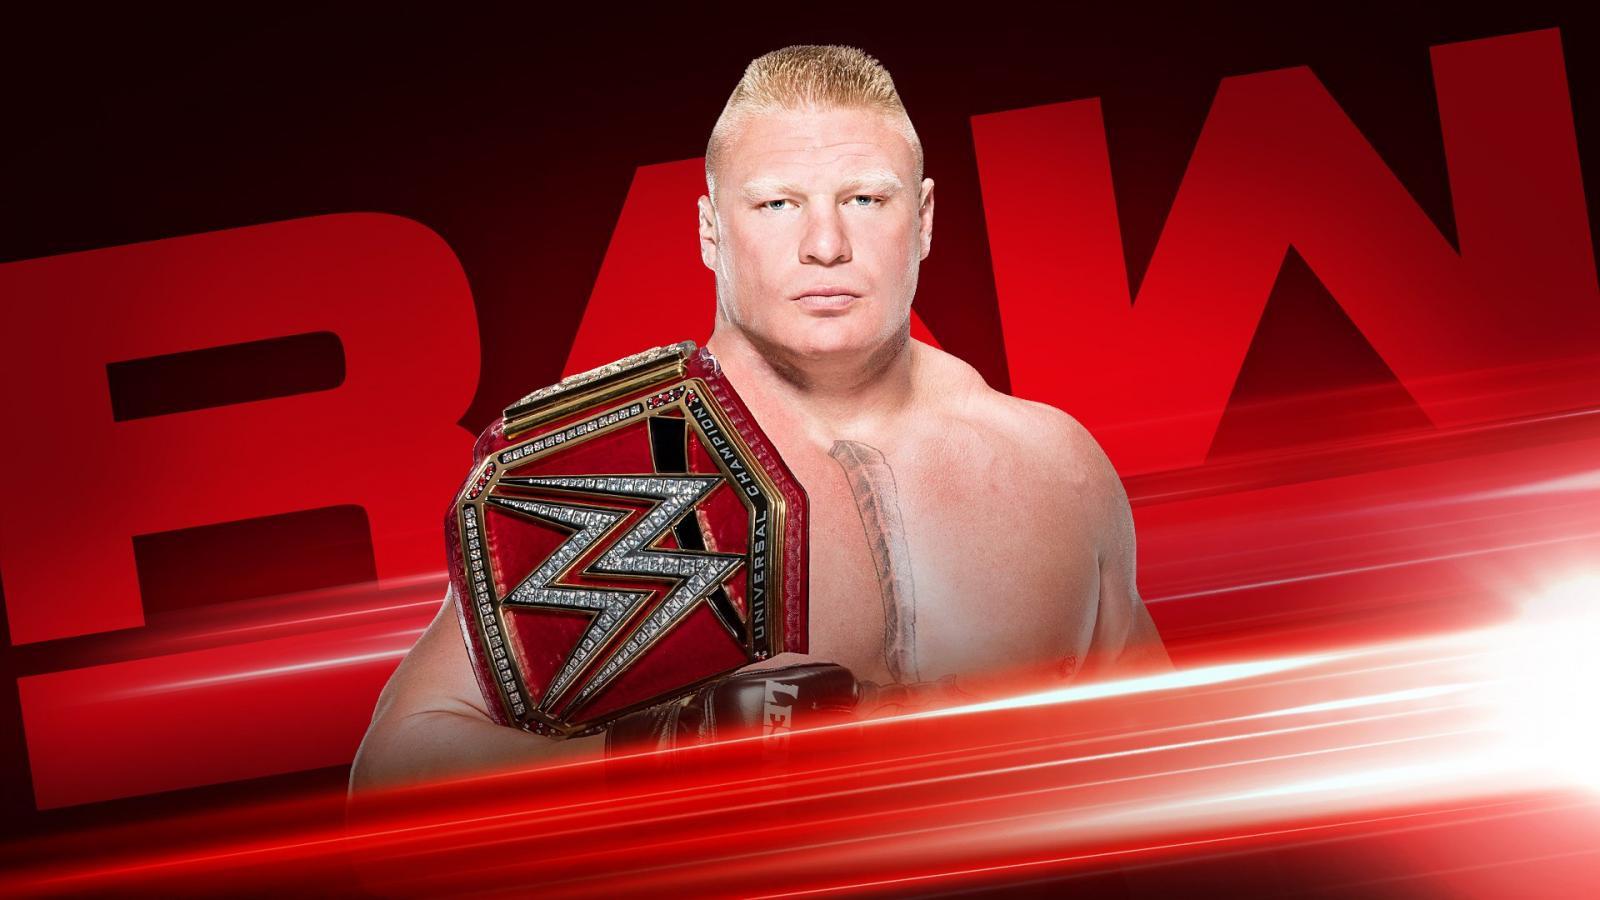 WWE Live Event Results From Joe Louis Arena (7/29), Brock Lesnar's